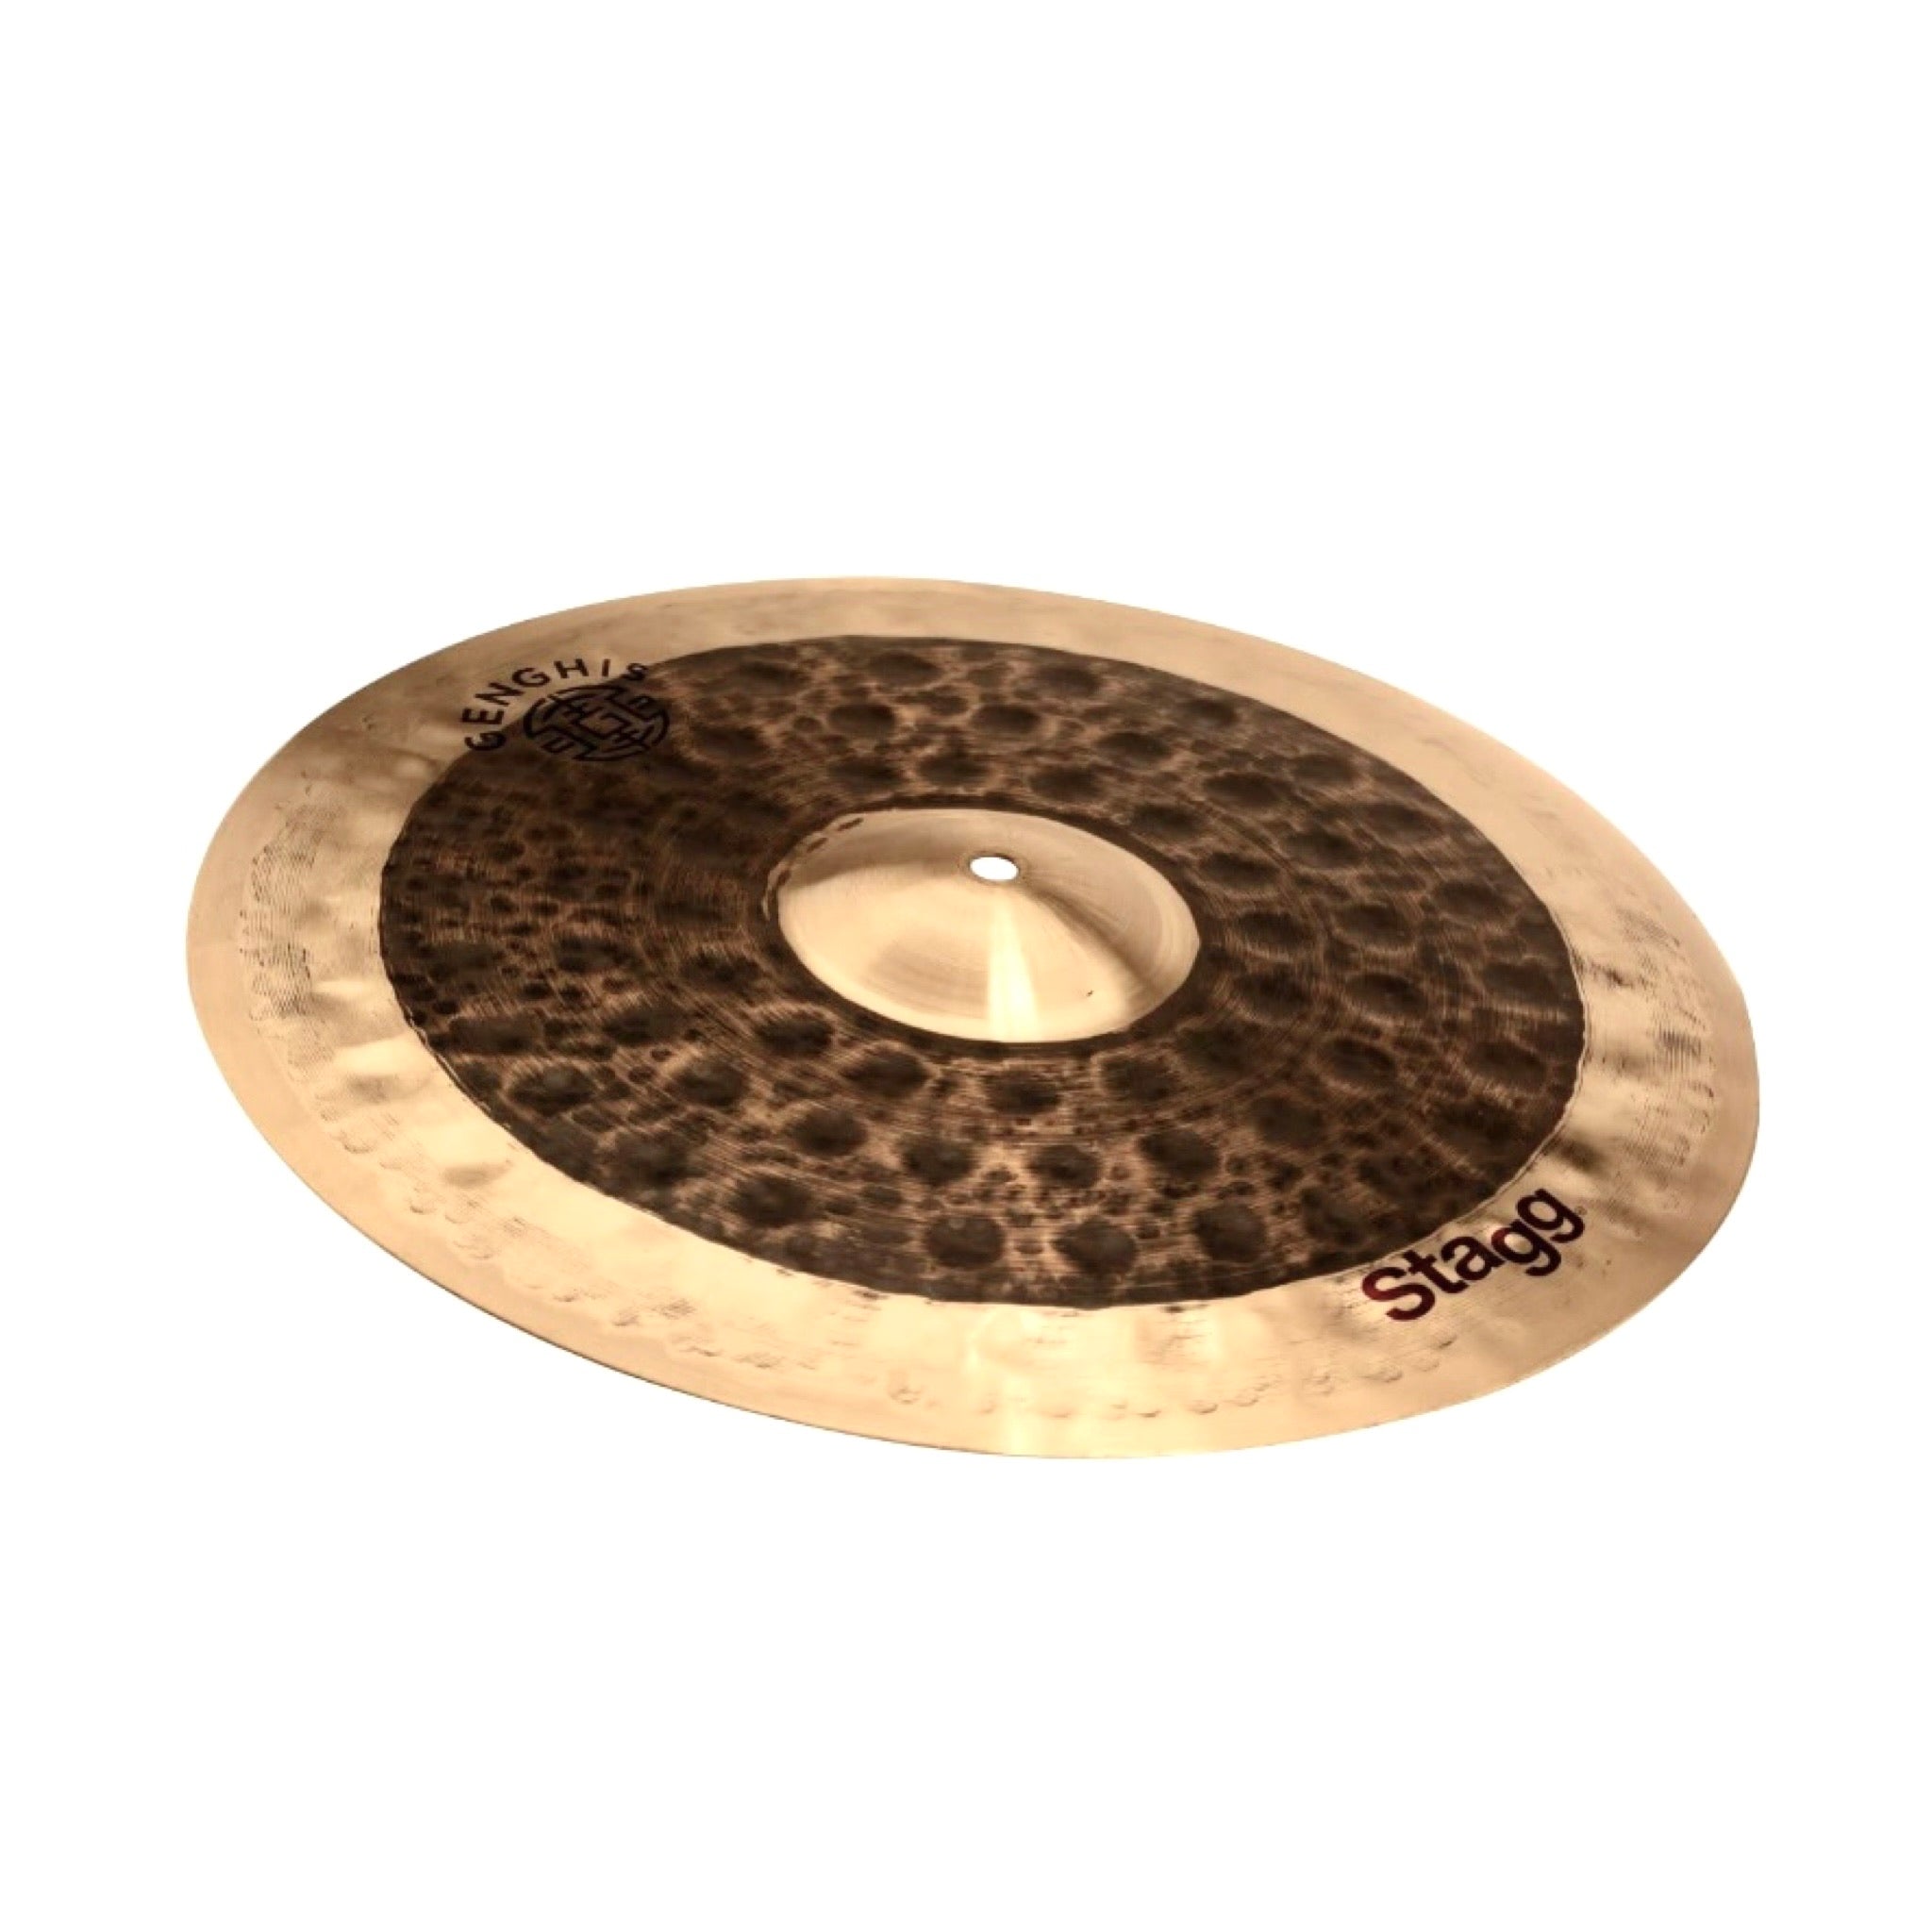 Cymbales & percussions » Percussions » Percussions enfants » Stagg